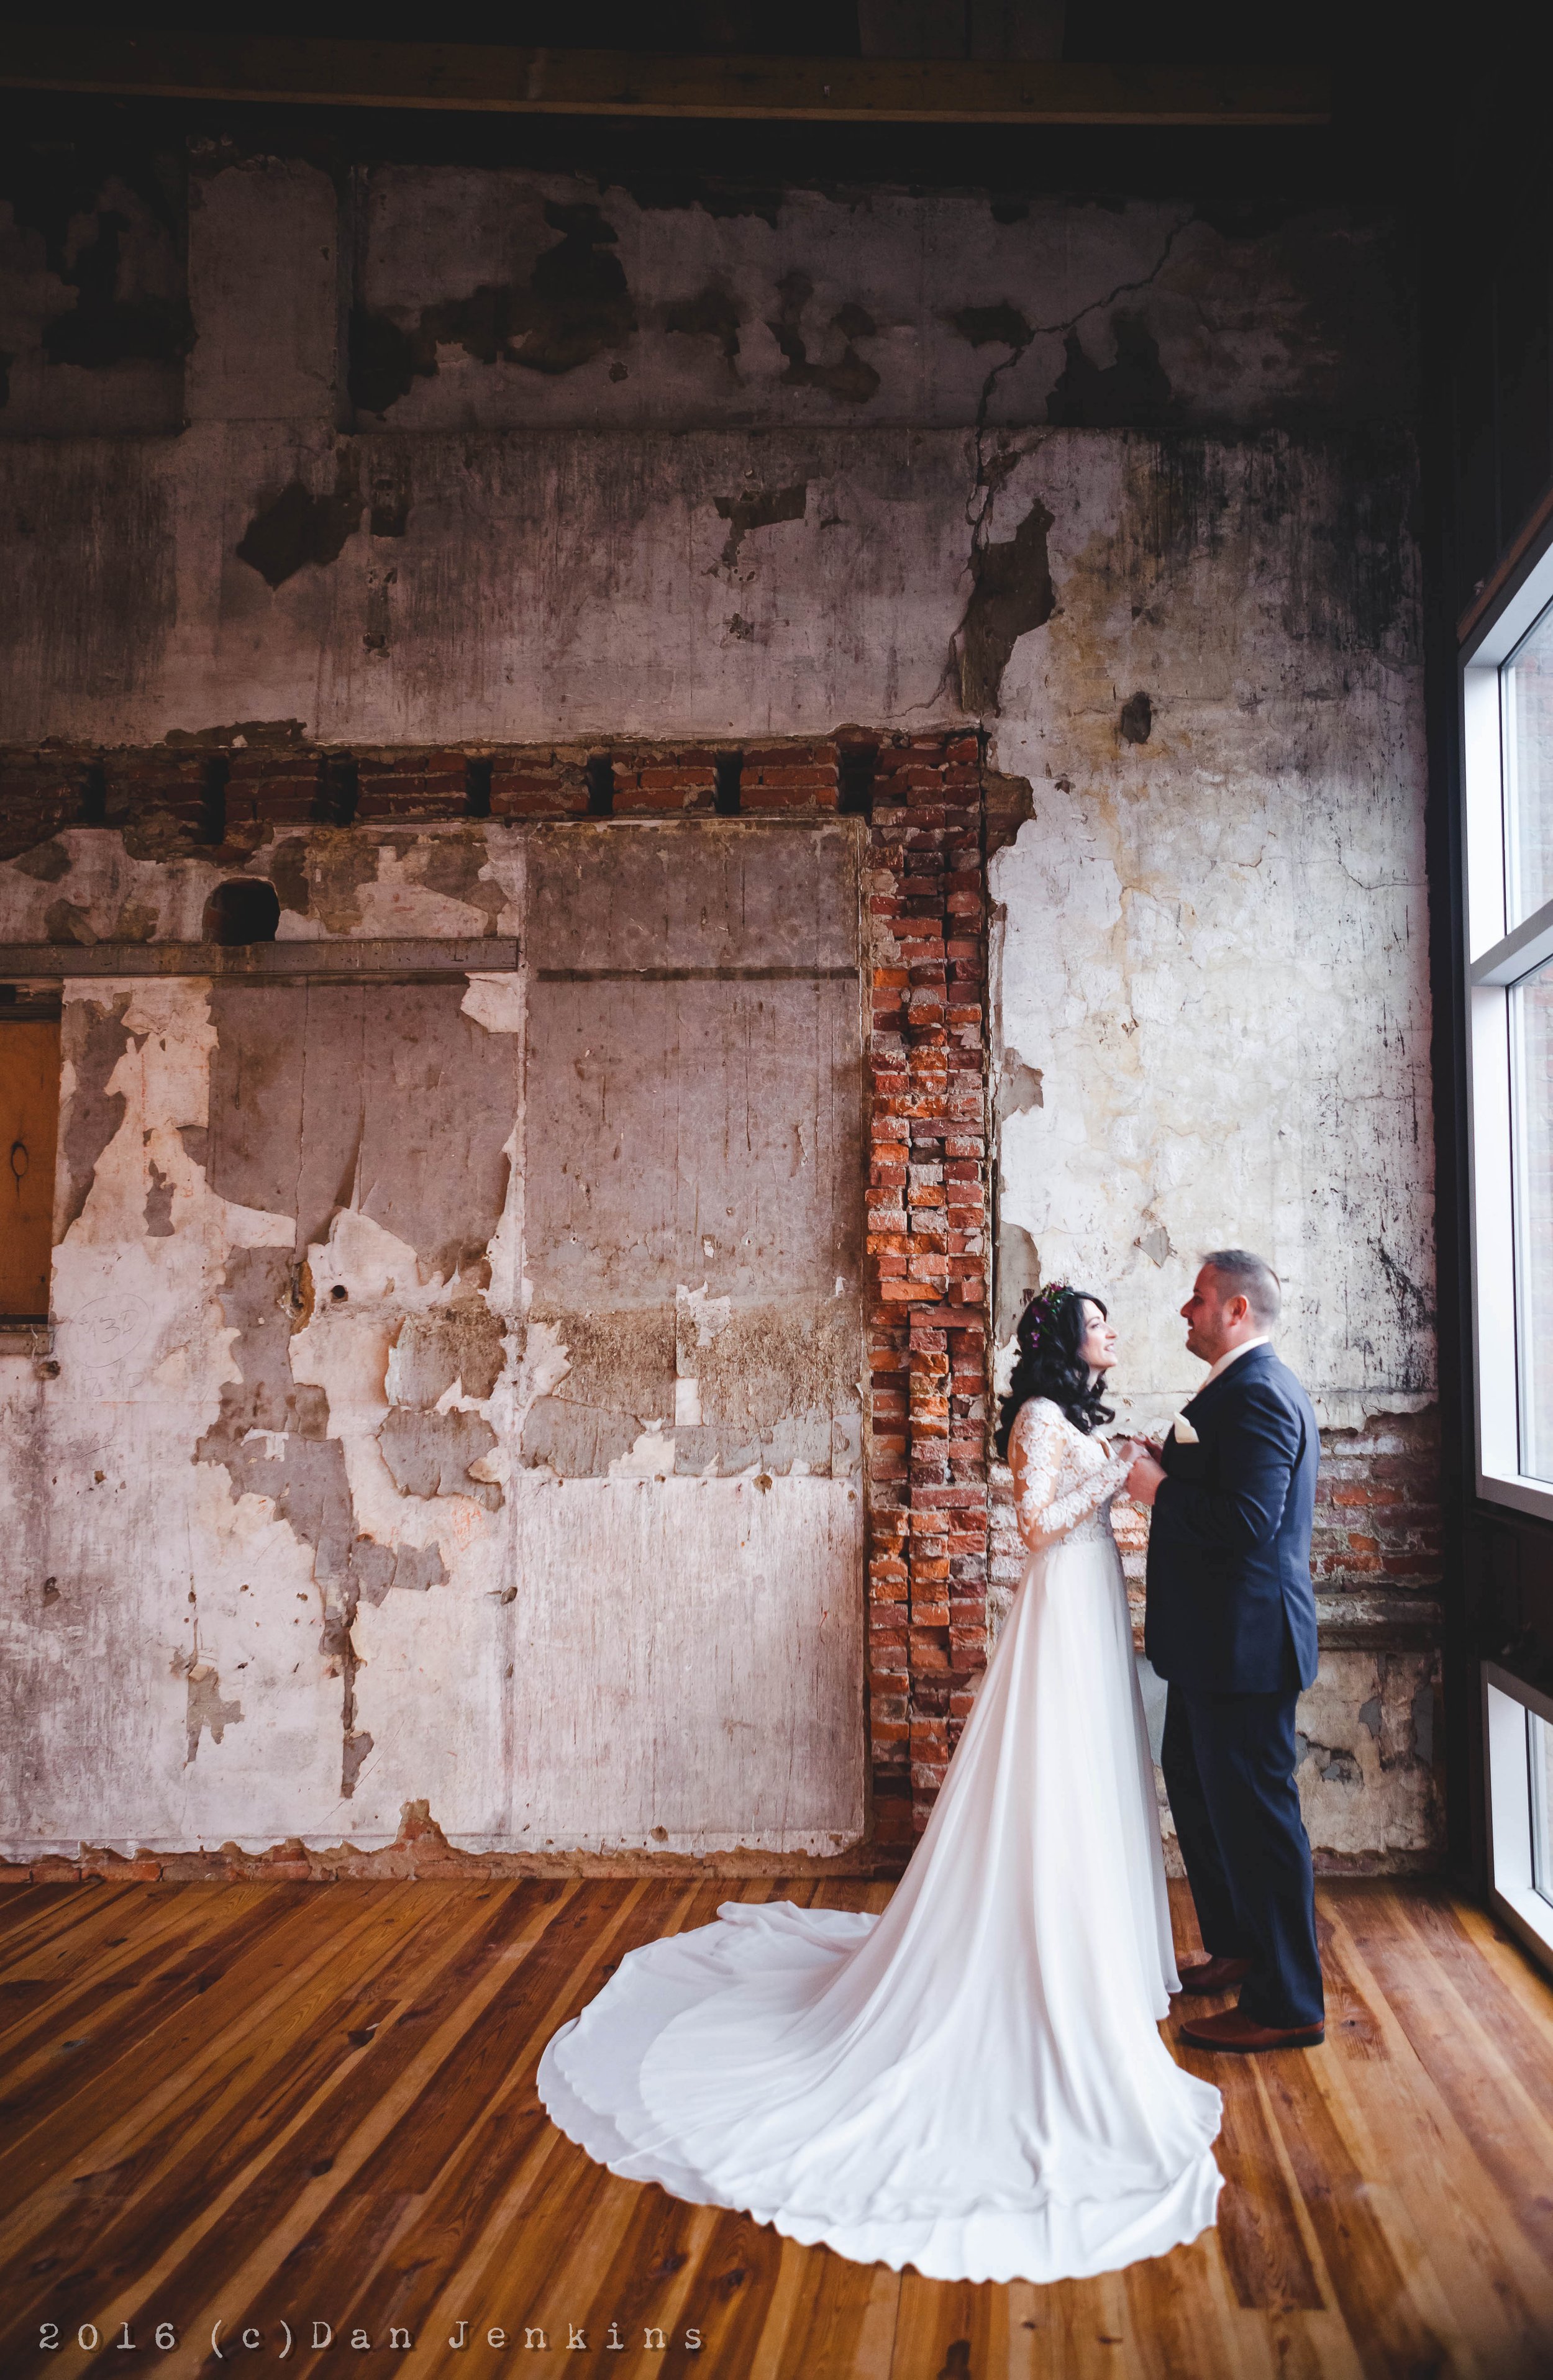 Bride and groom in eclectic antique room